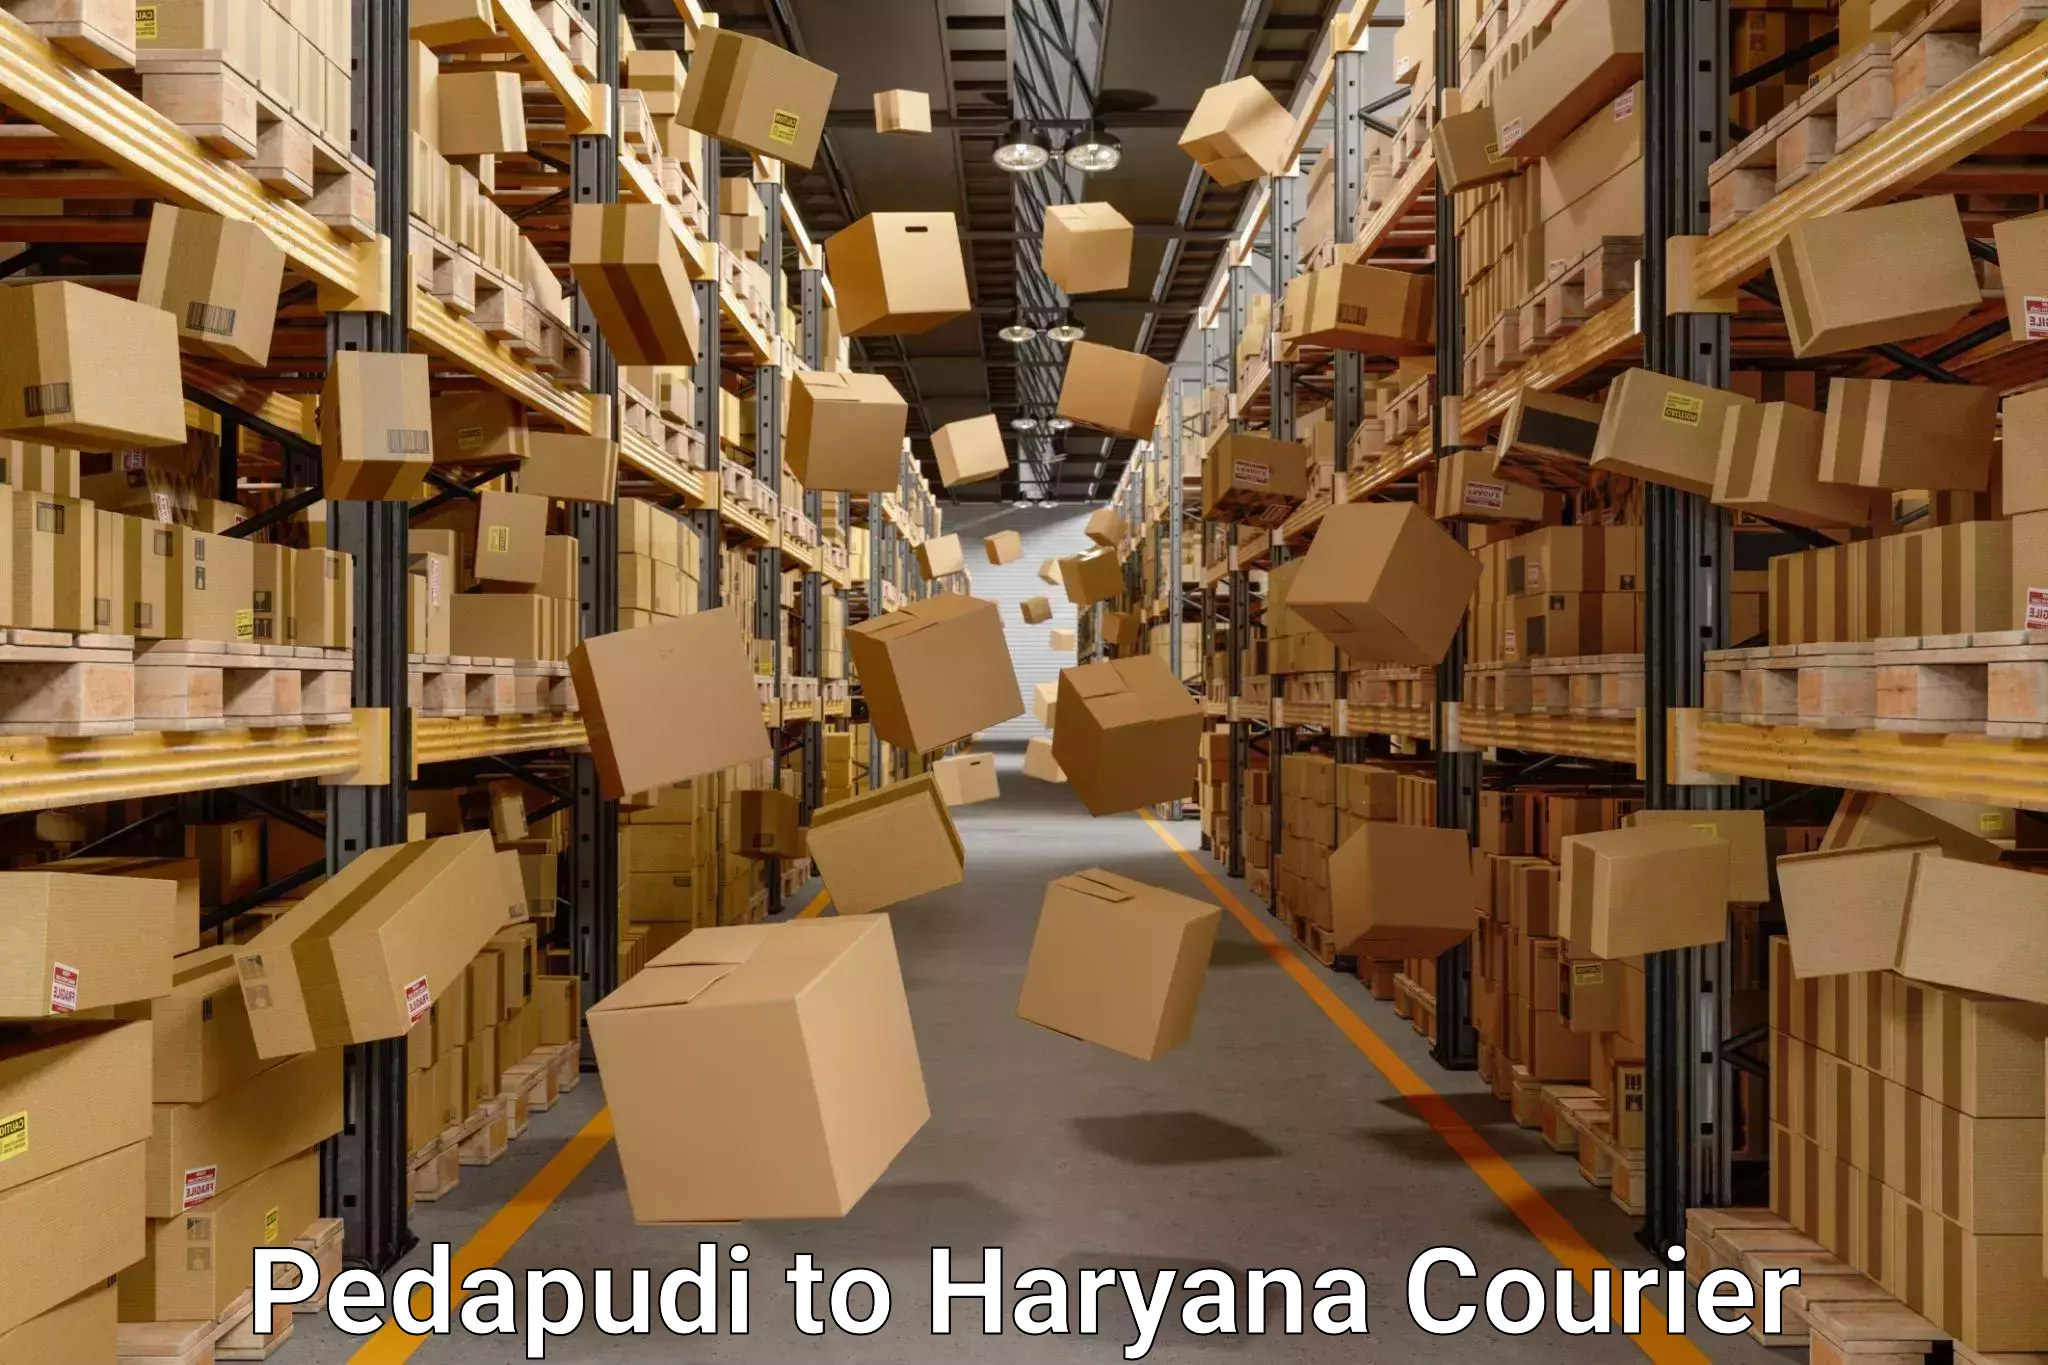 Trusted relocation experts Pedapudi to Haryana